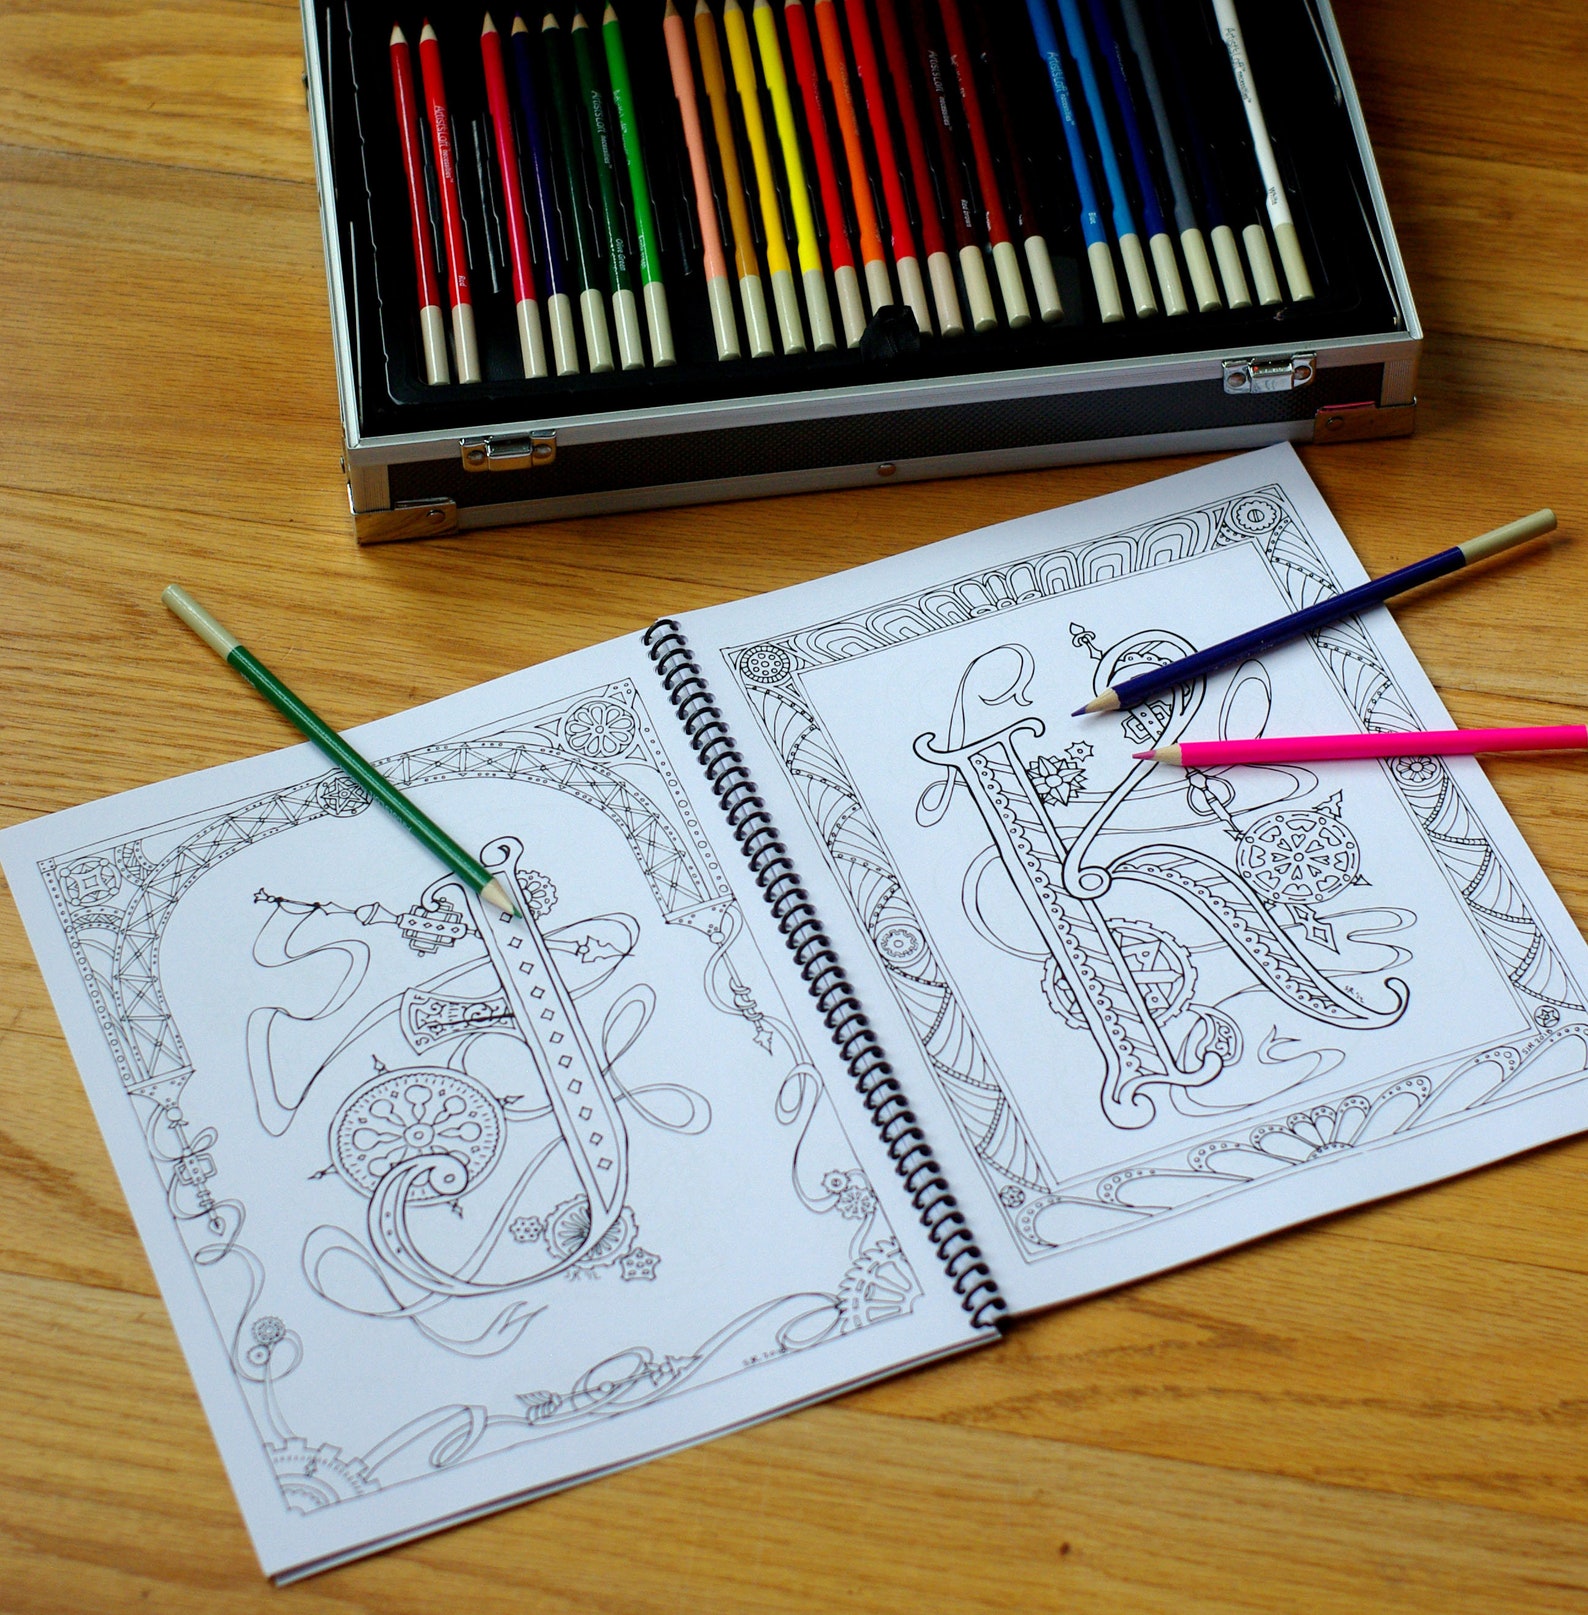 The Steampunk and Doodle Alphabets Coloring Book